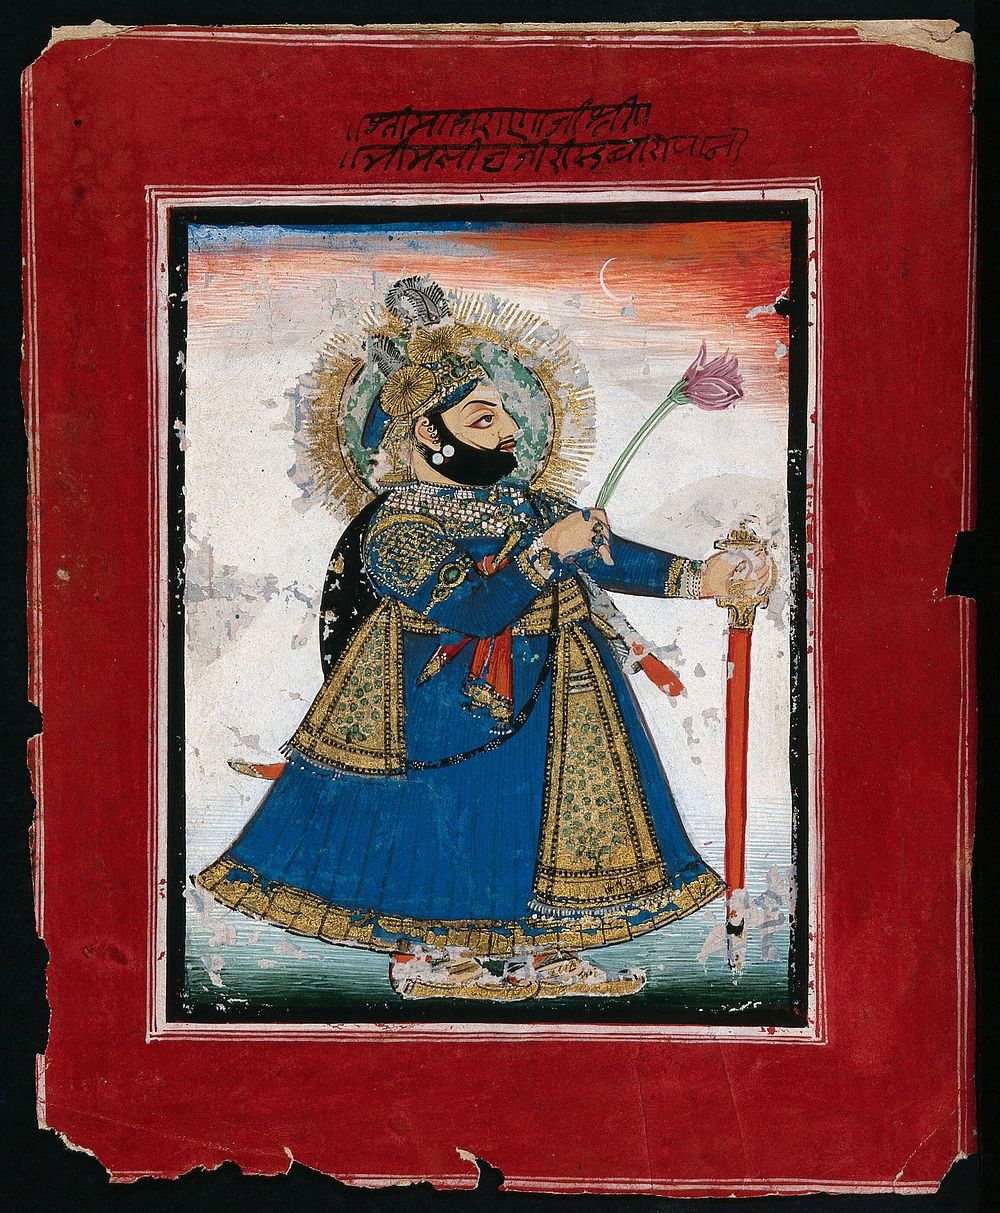 A Sikh ruler holding a lotus flower. Gouache painting by an Indian painter.